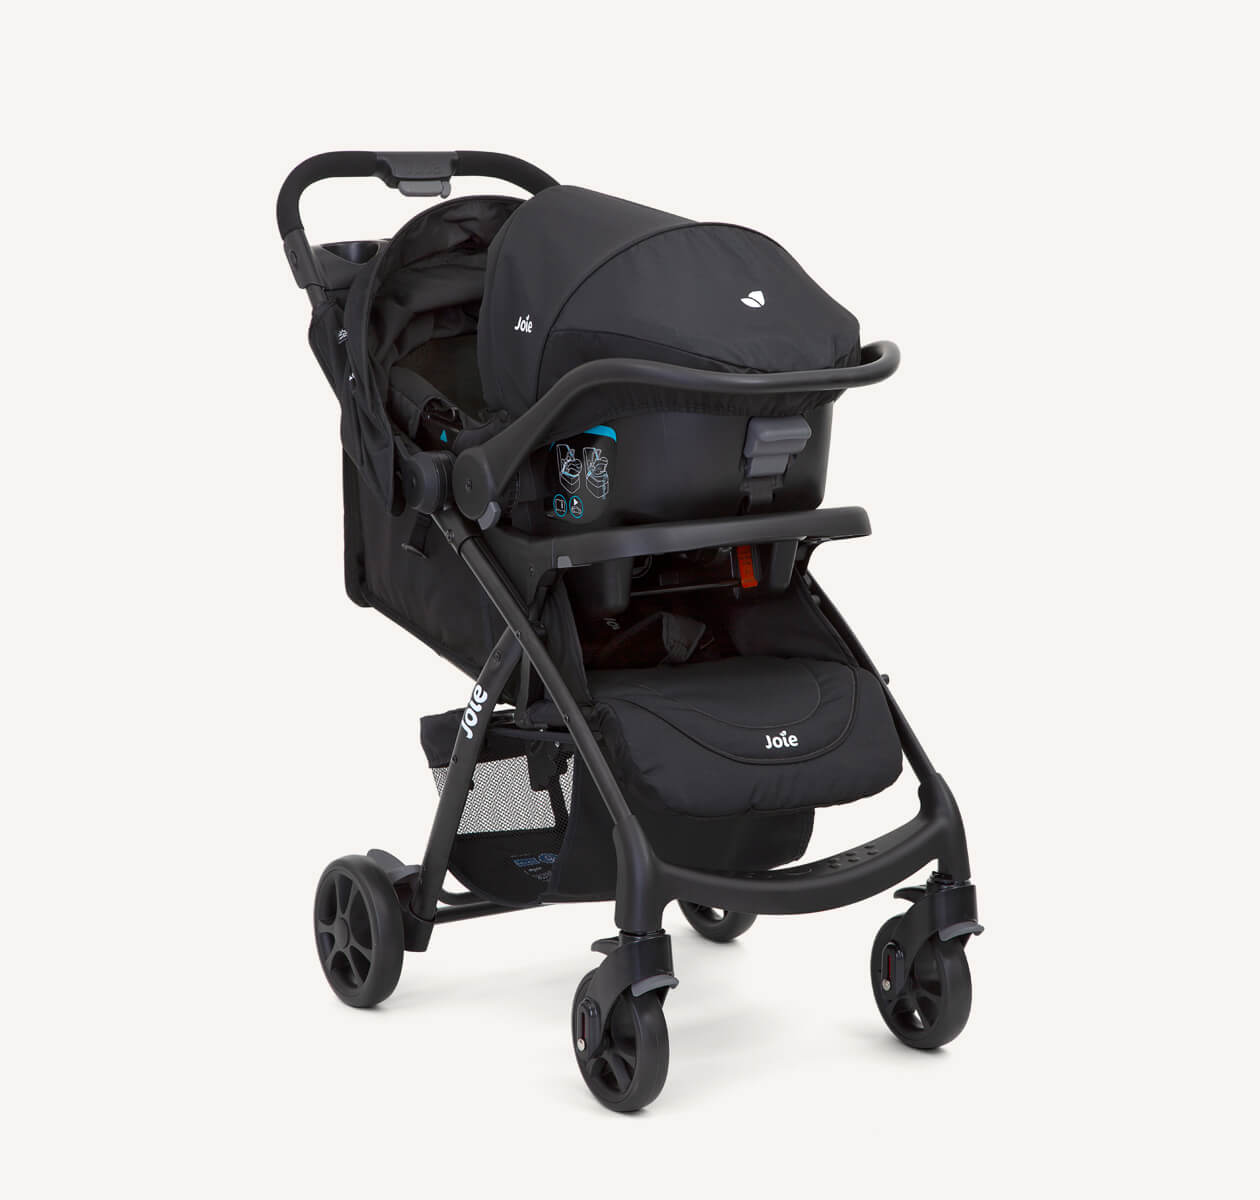 p1-joie-travelsystem-muzelxts-coal-right-angle-infant-carrier_1